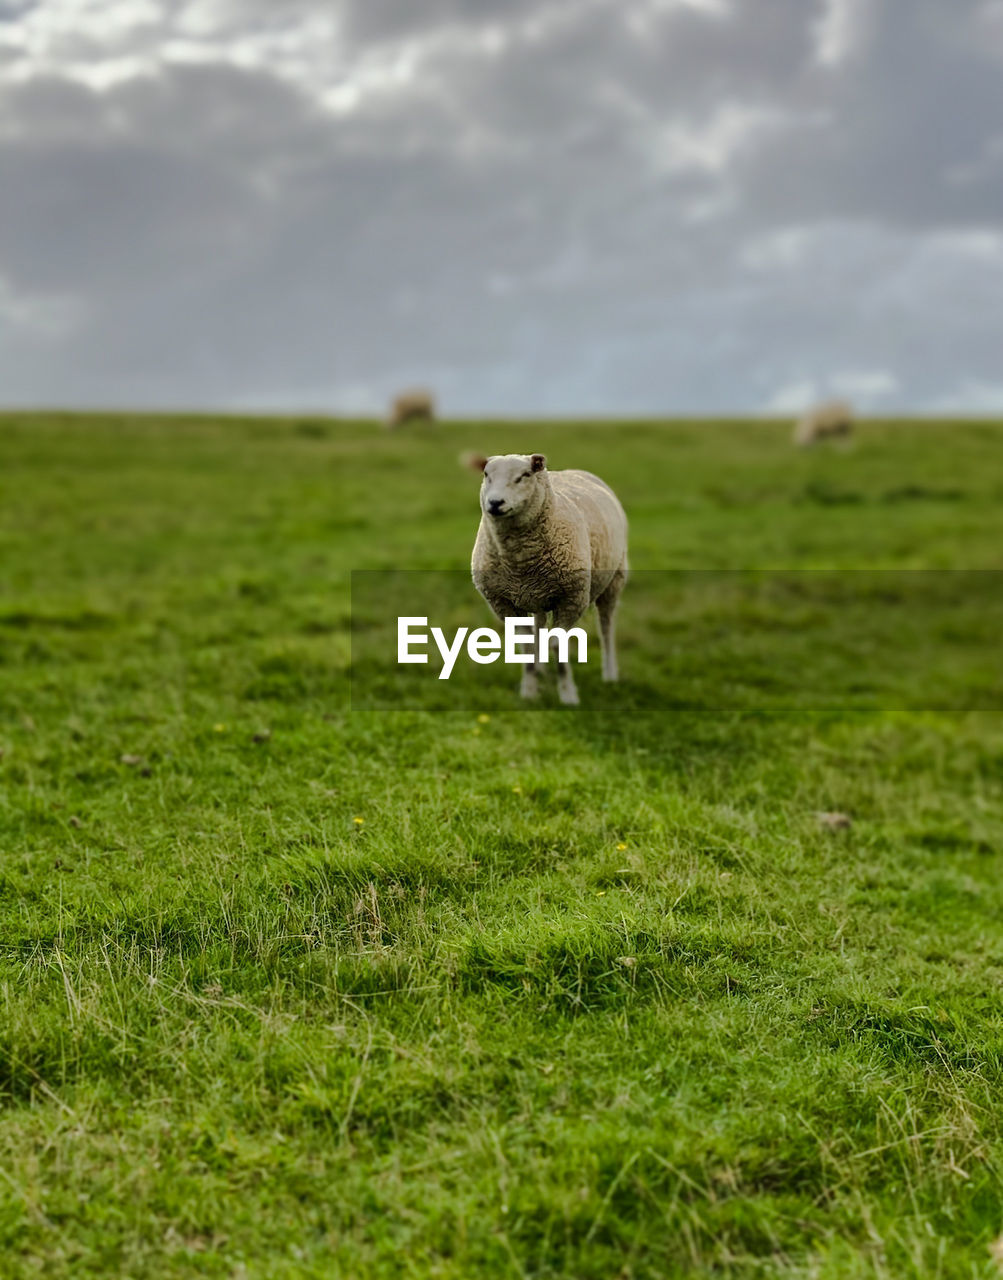 SHEEP STANDING IN A FIELD